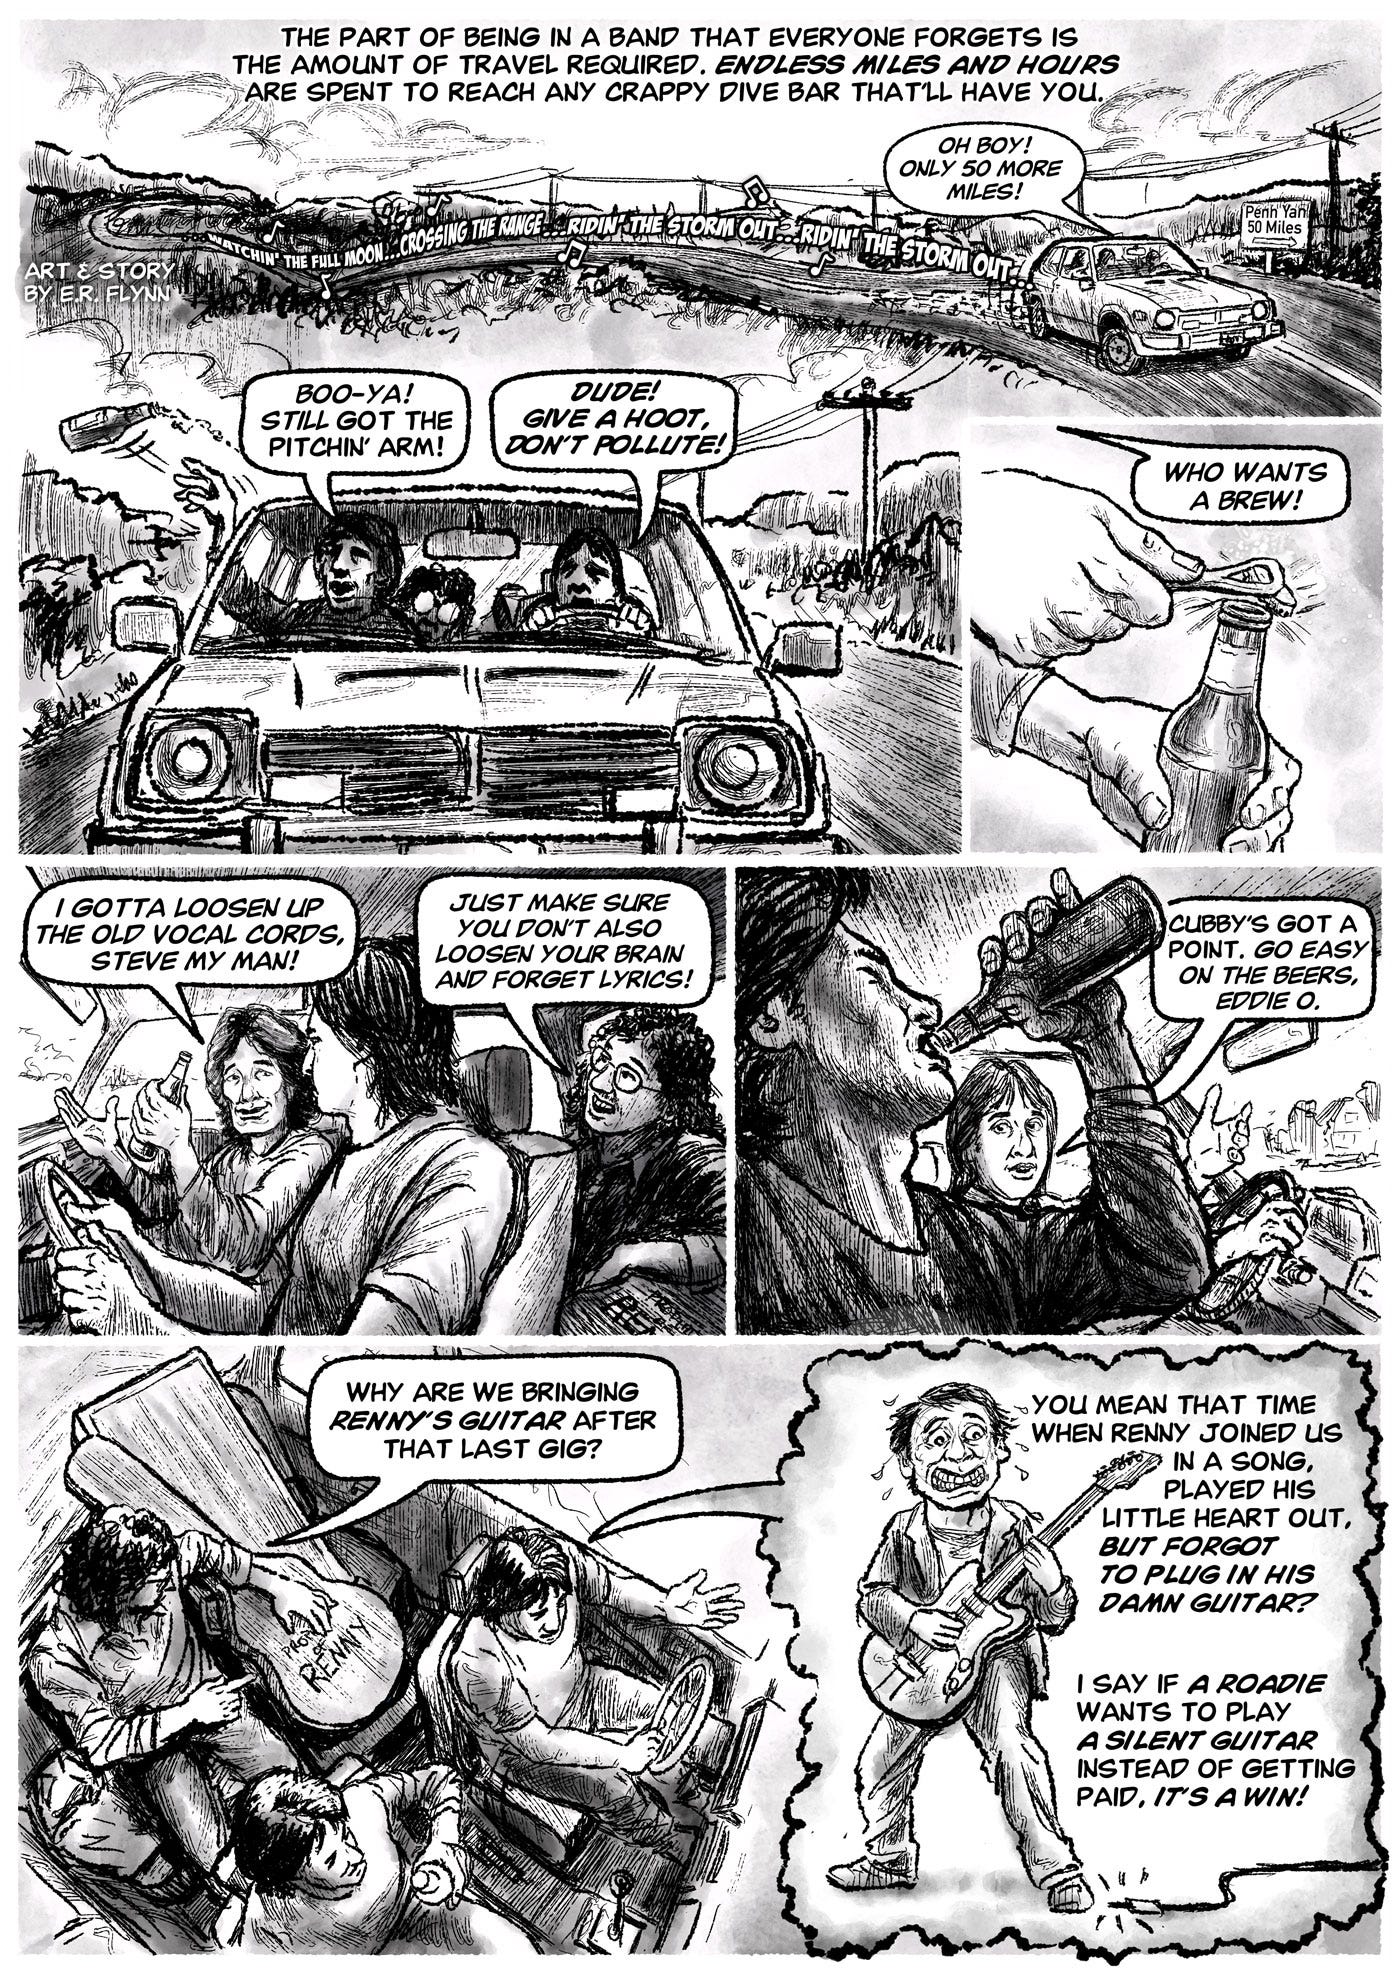 page1 of Hammer Stories, Rennys Git - Created by ER Flynn